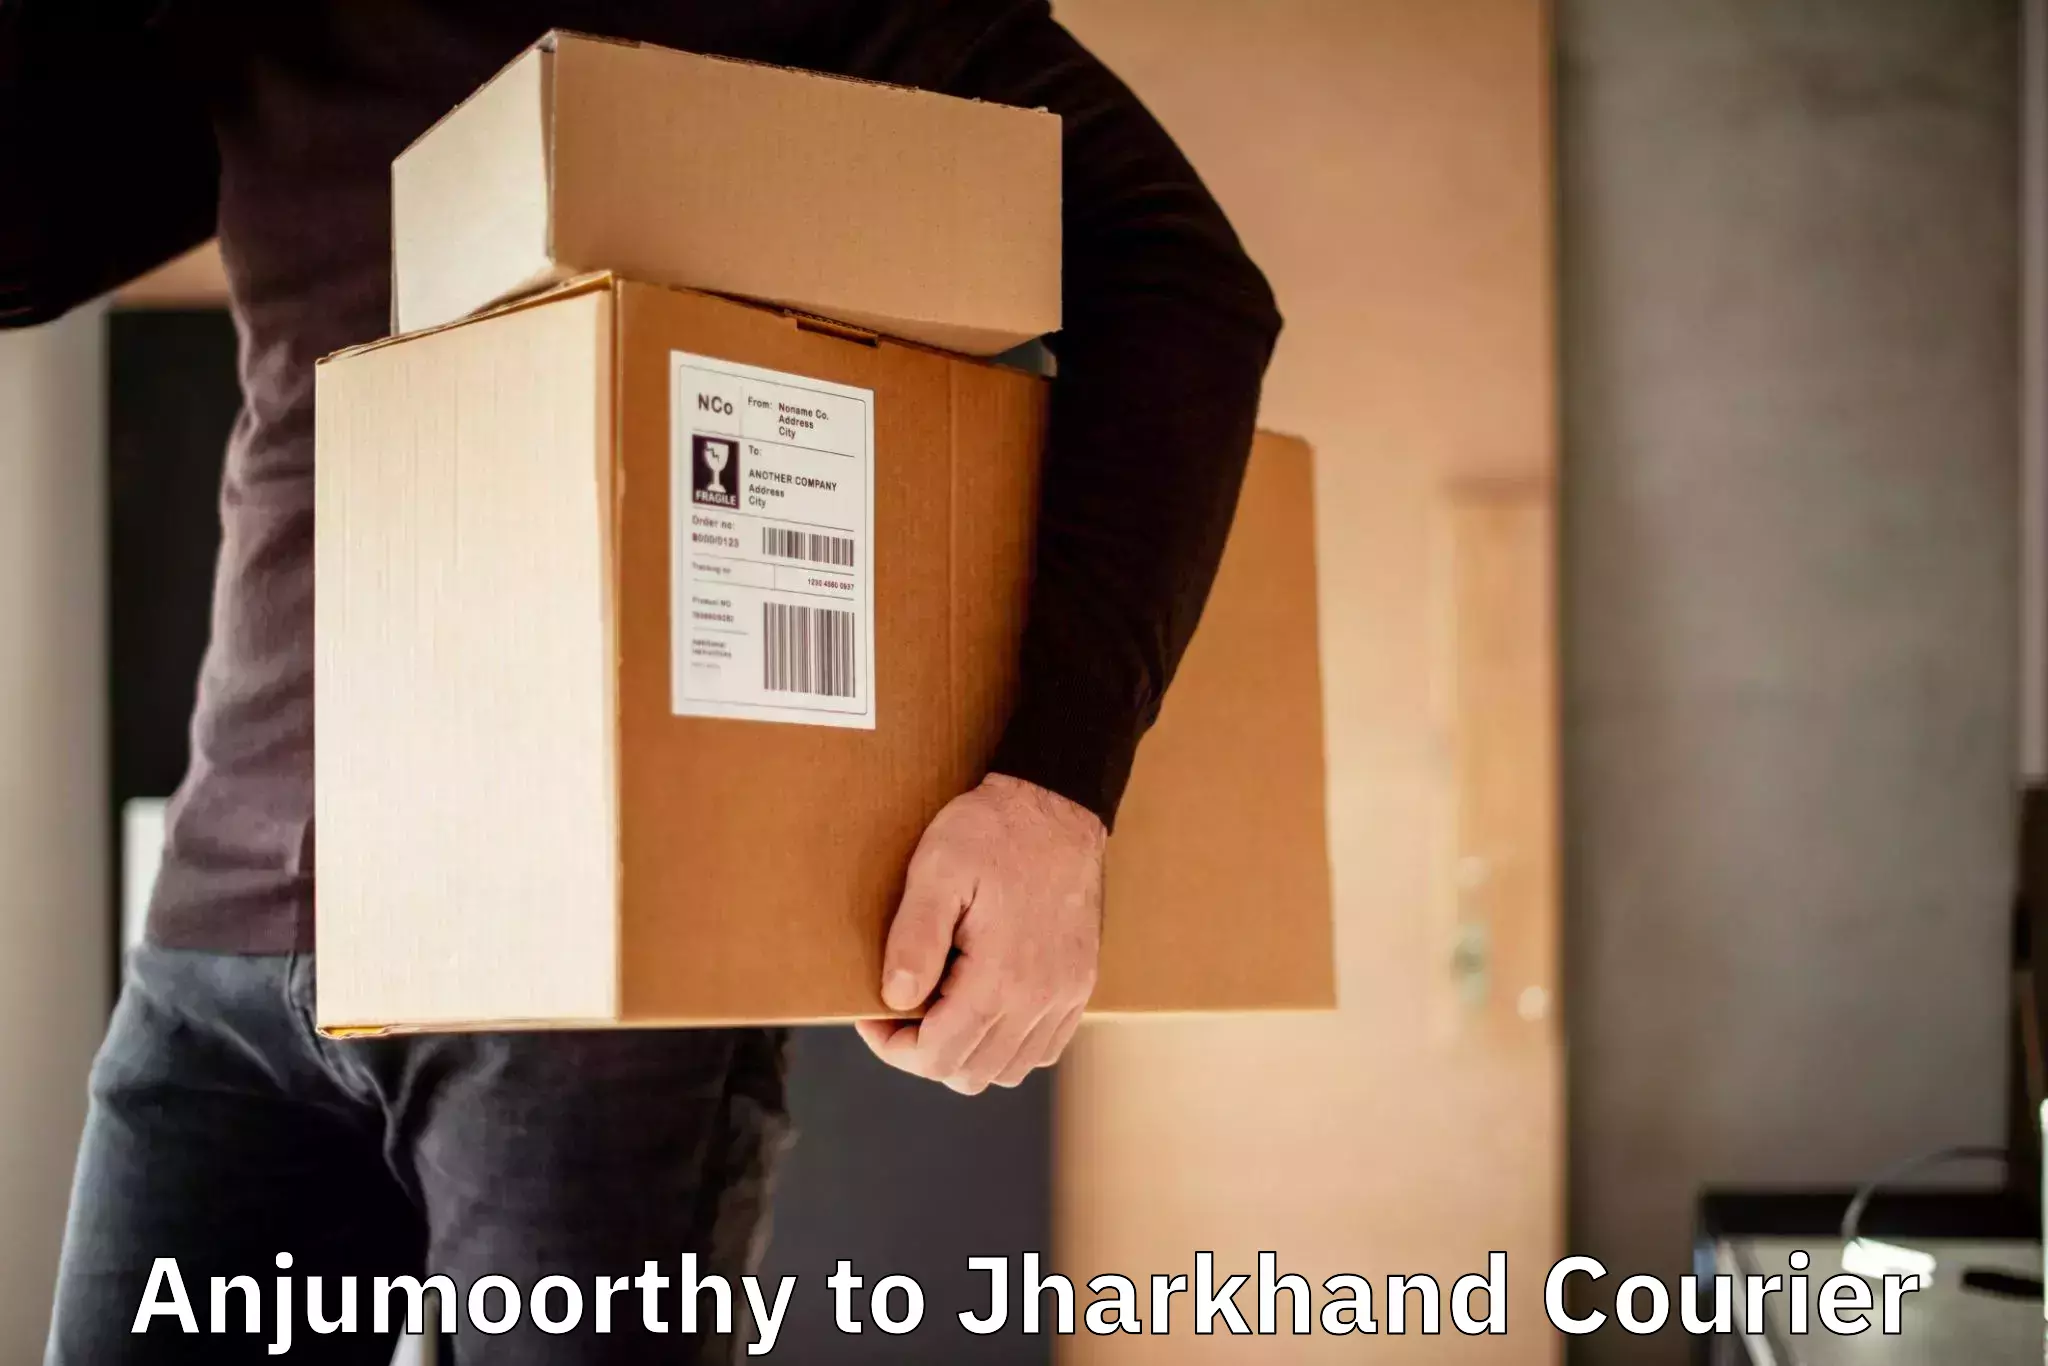 Nationwide parcel services Anjumoorthy to Chandwa